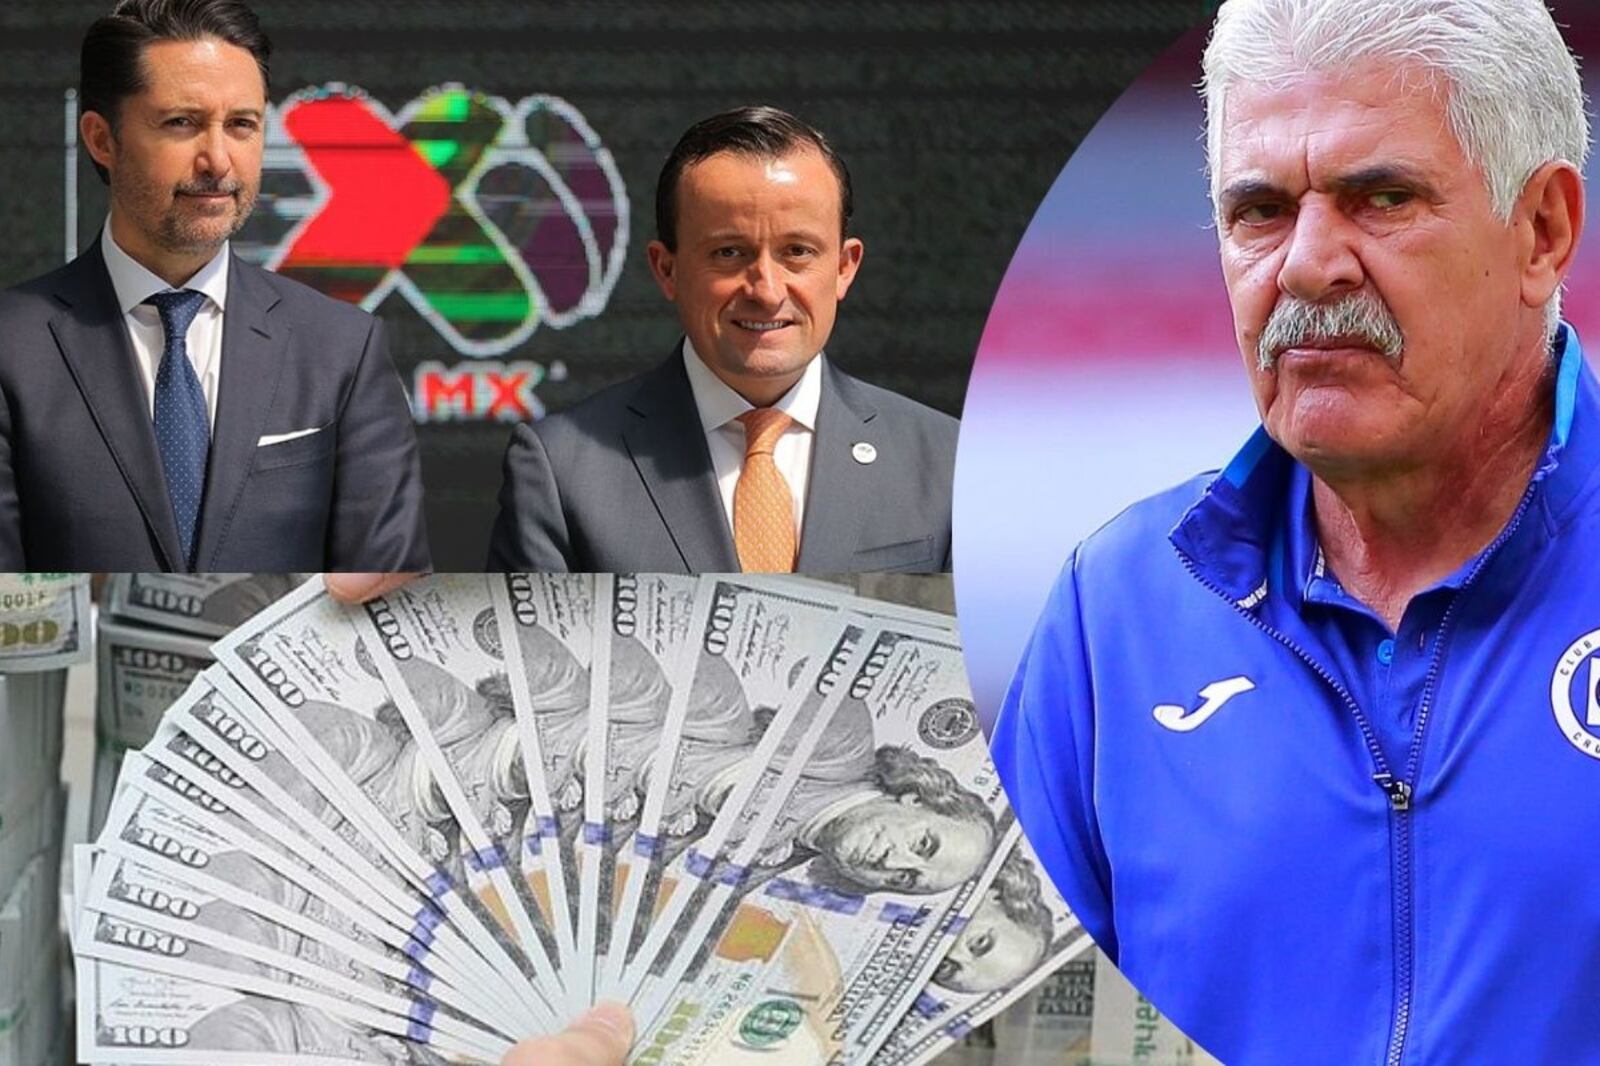 He said that they are only interested in money, the sanction for Ferretti in Cruz Azul